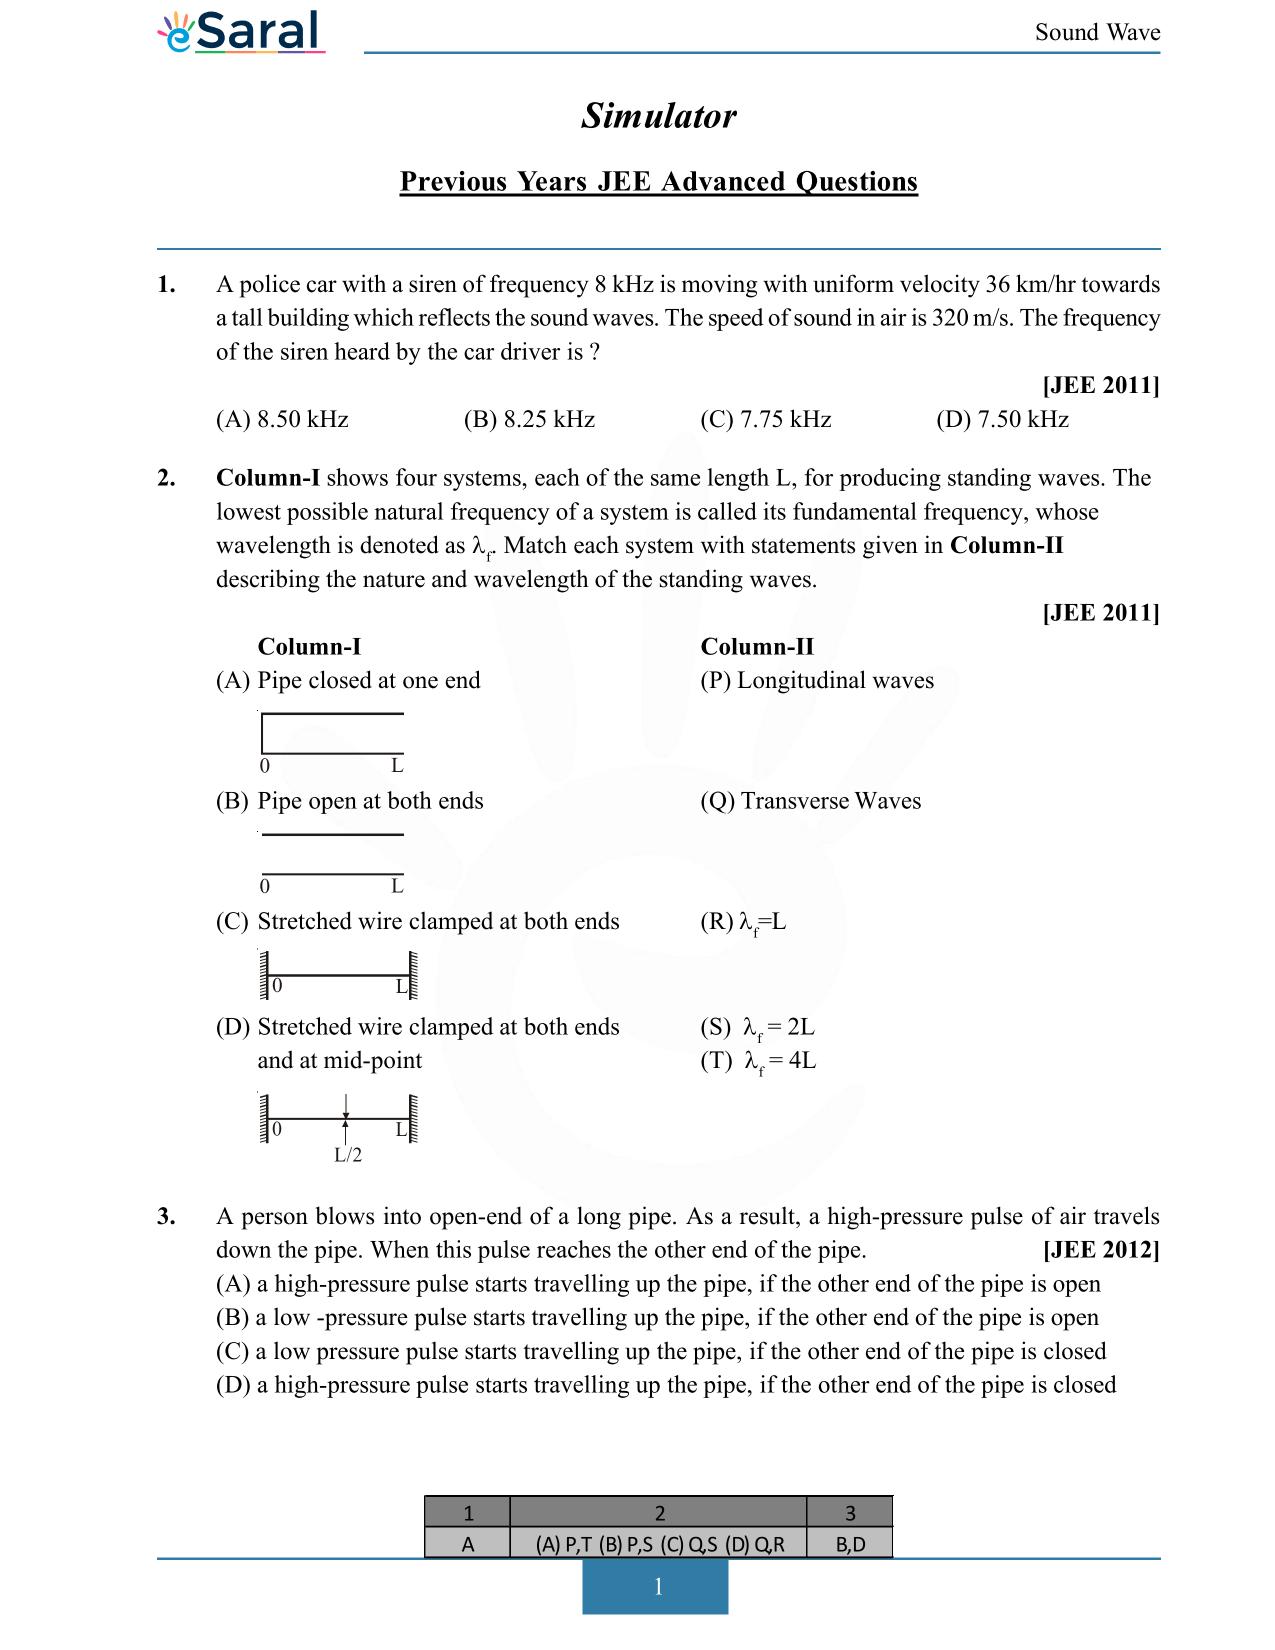 Simple Harmonic Motion - JEE Advanced Previous Year Questions with Solutions